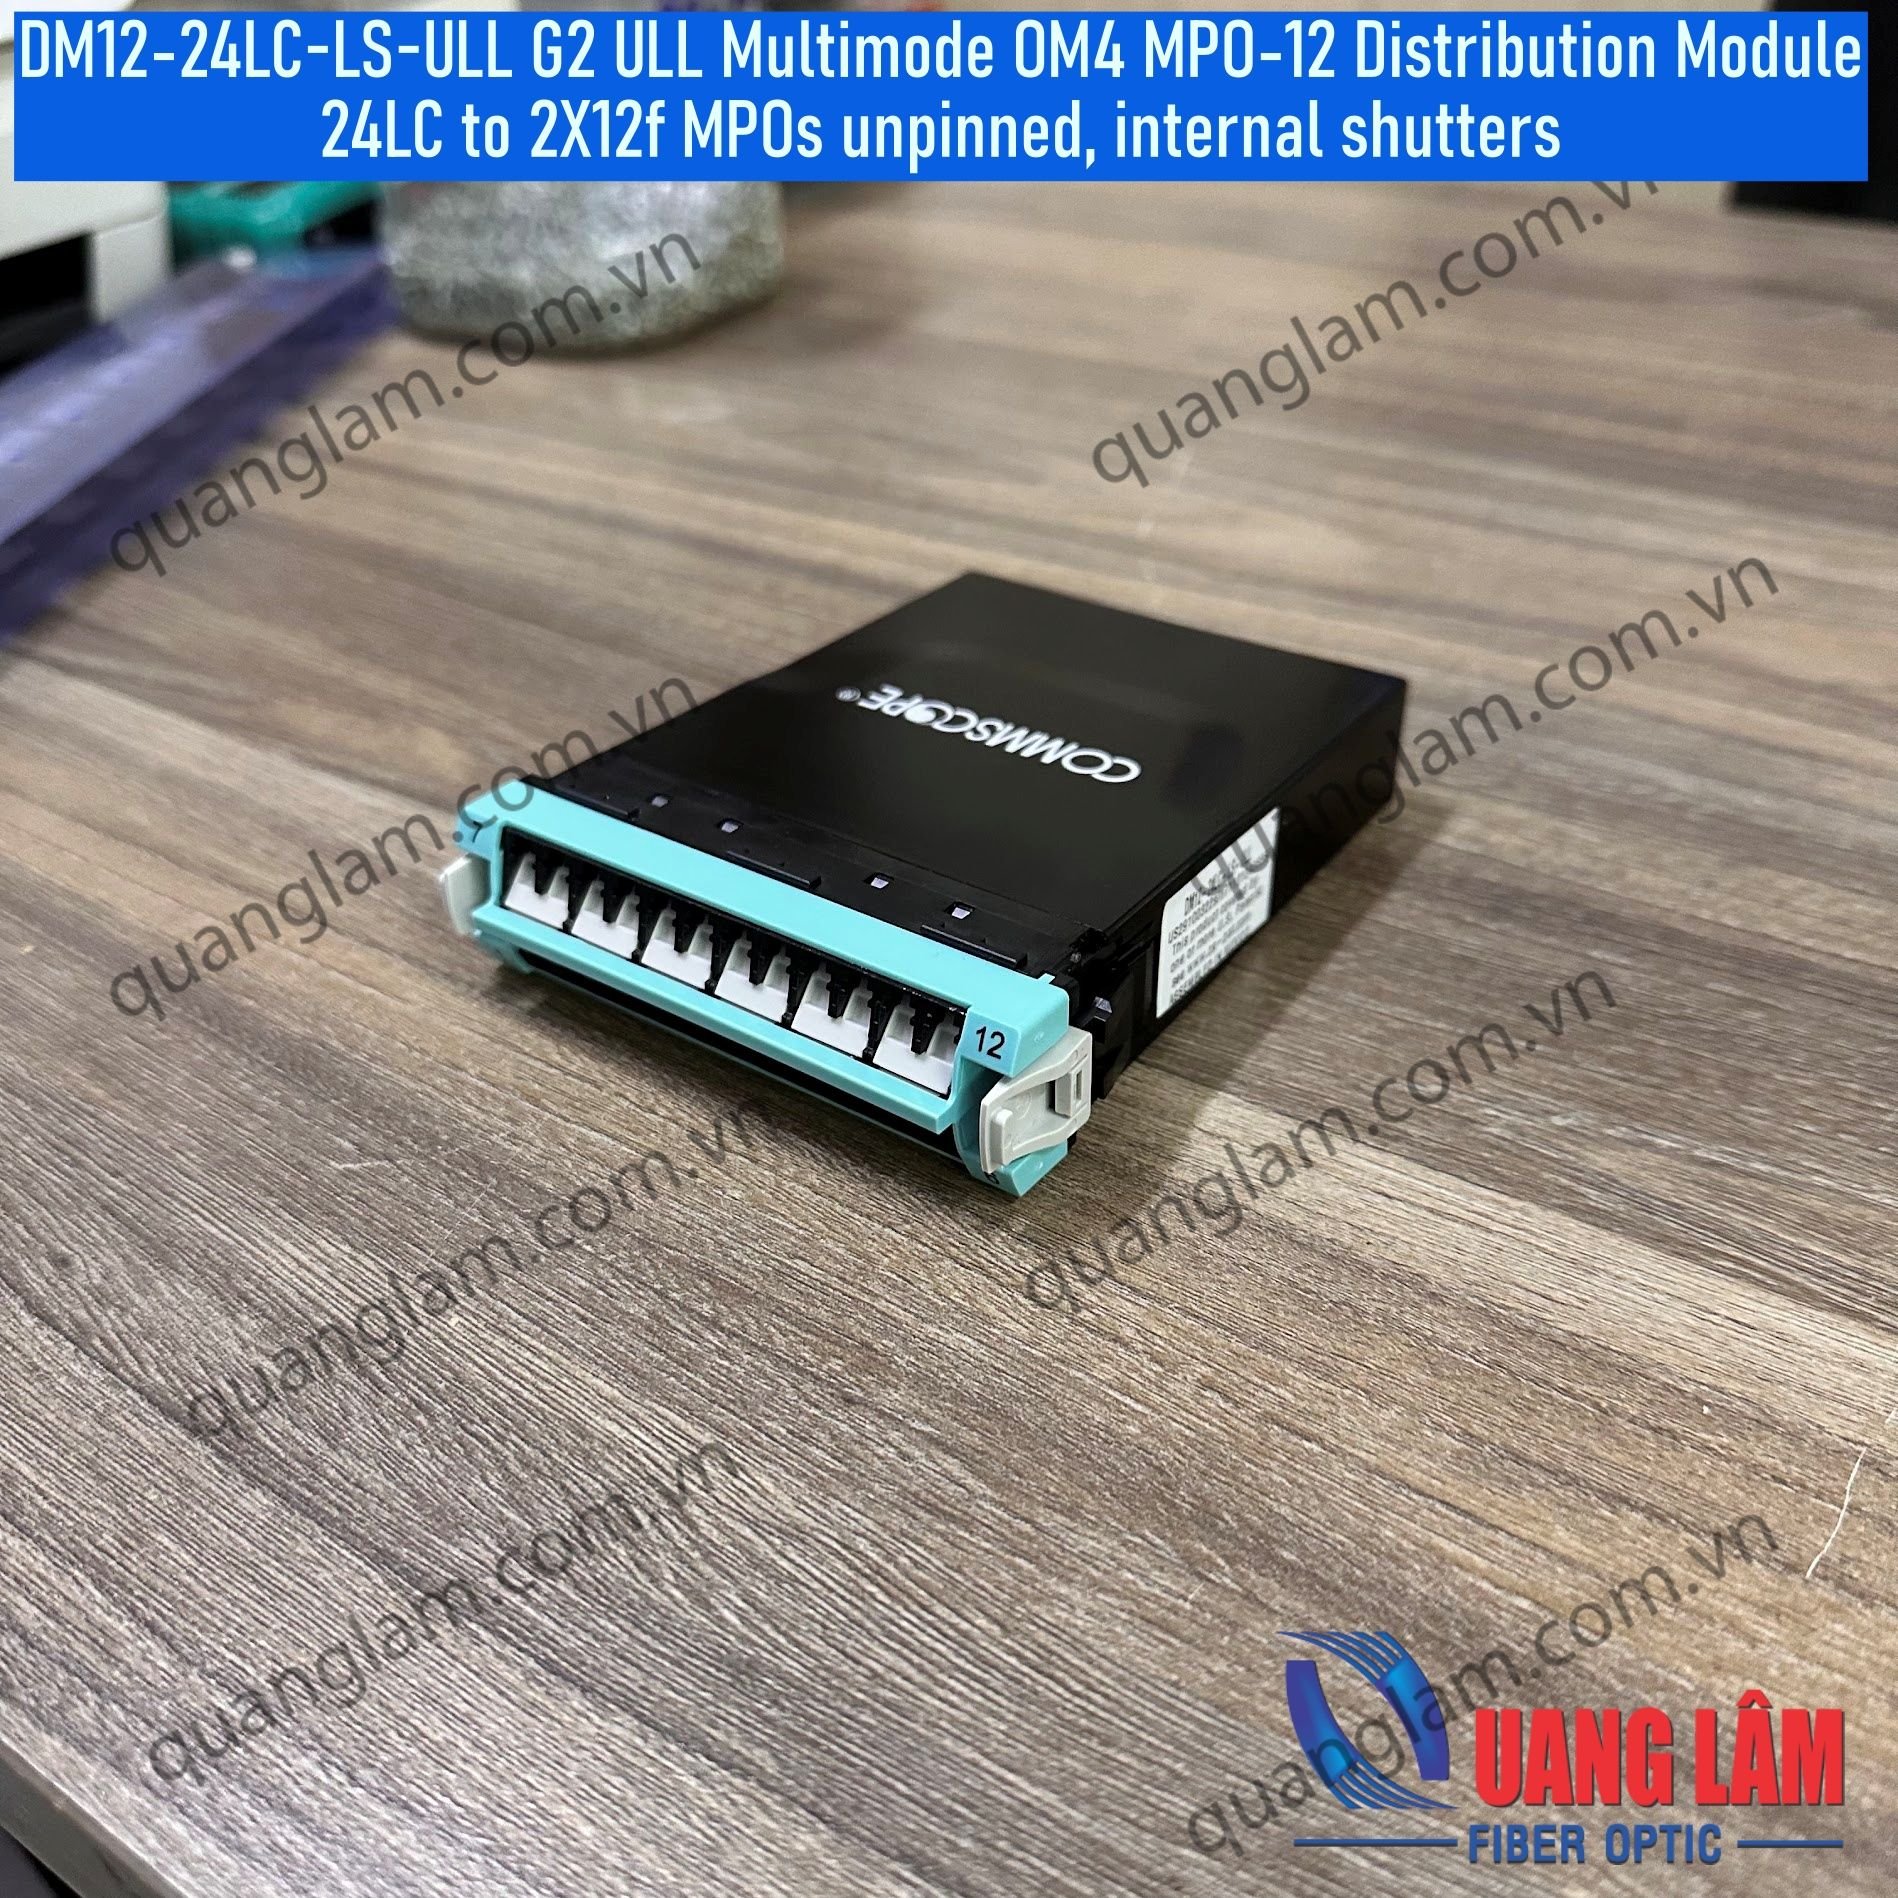 DM12-24LC-LS-ULL G2 ULL Multimode OM4 MPO-12 Distribution Module, 24LC to 2X12f MPOs unpinned, internal shutters